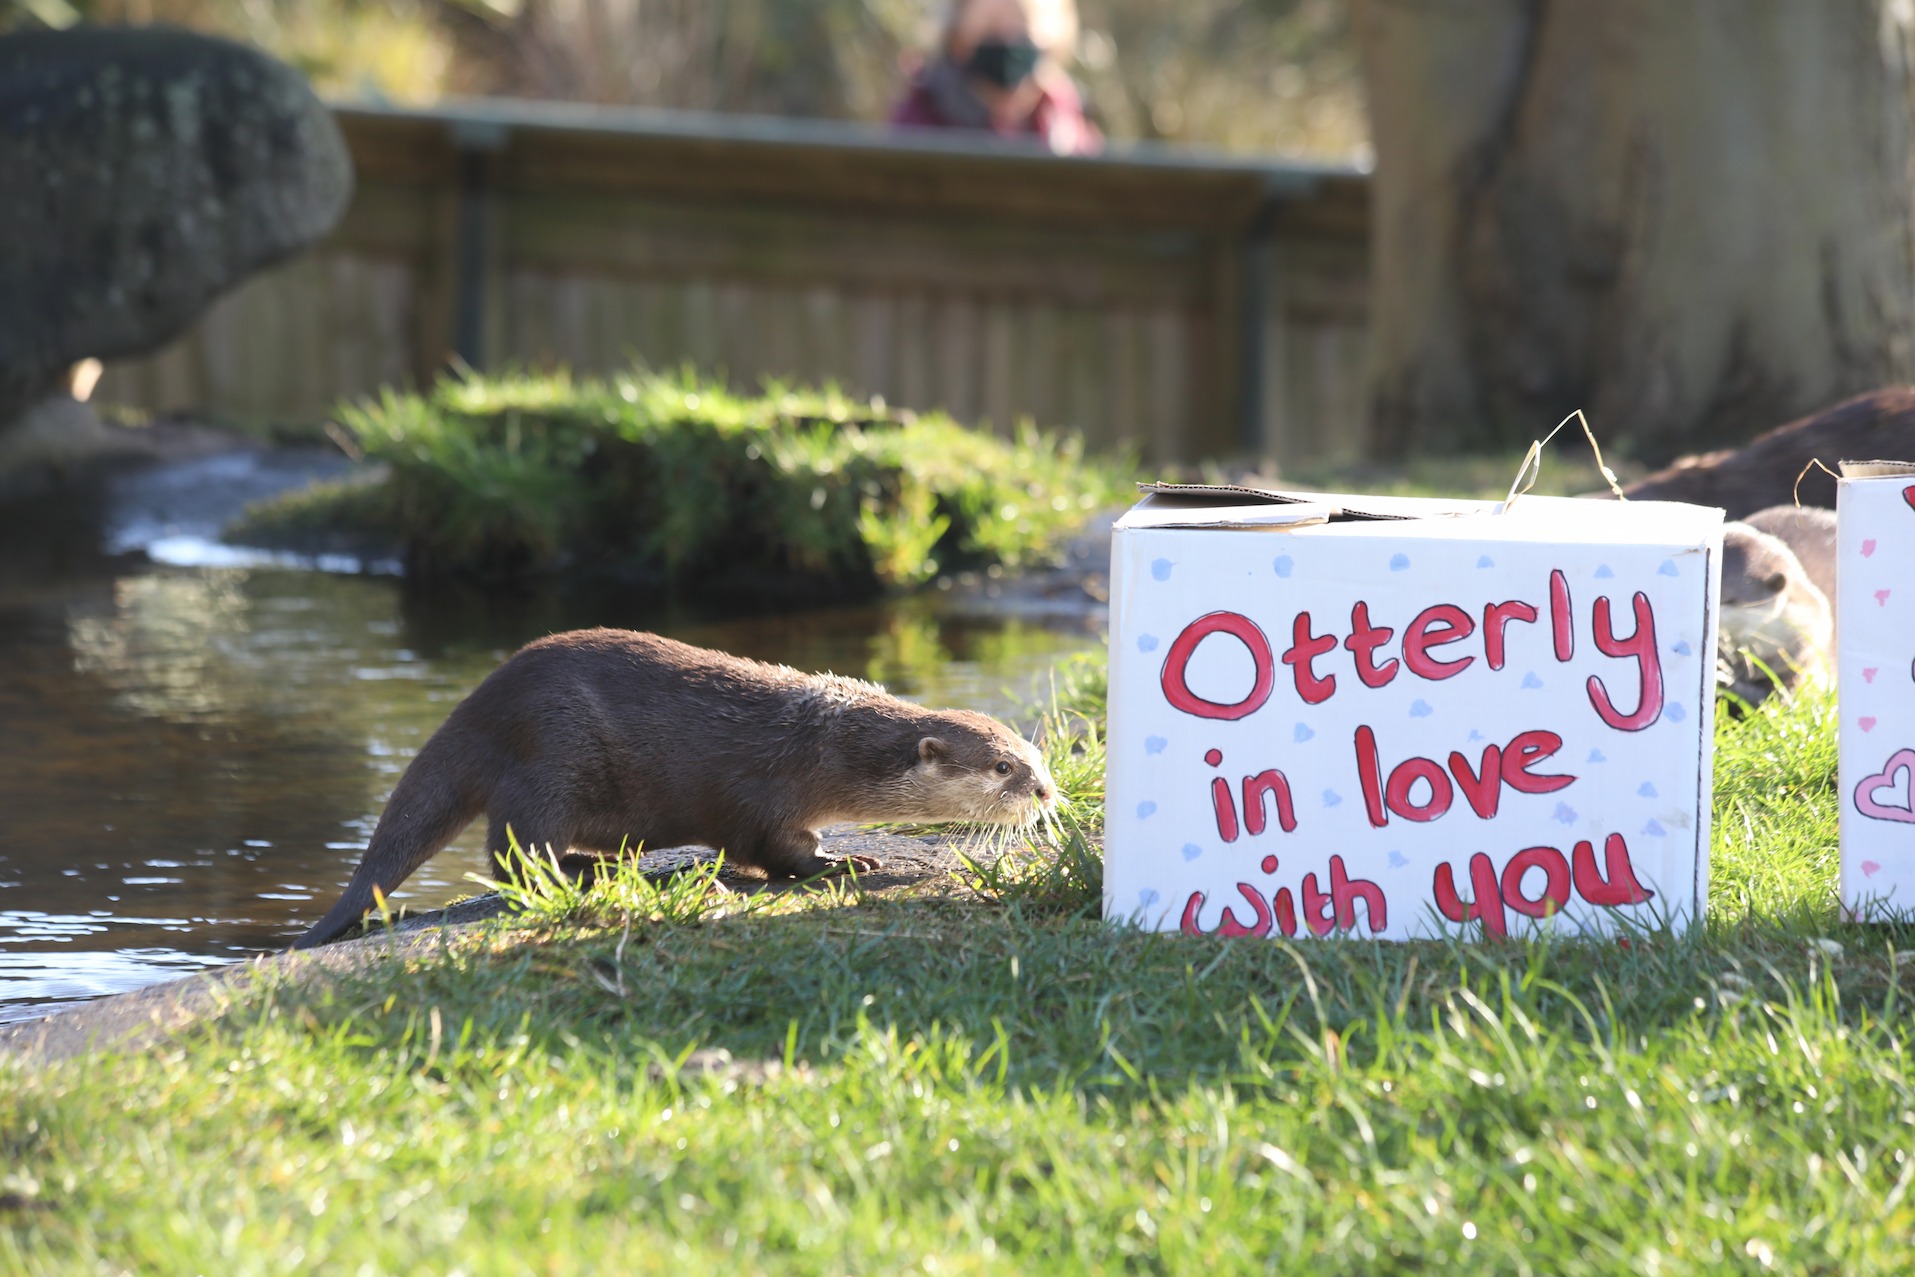 Otter sniffing decorated valentines box which says otterly in love with you in red writing on white background

Image: JASMINE GEDDES 2022